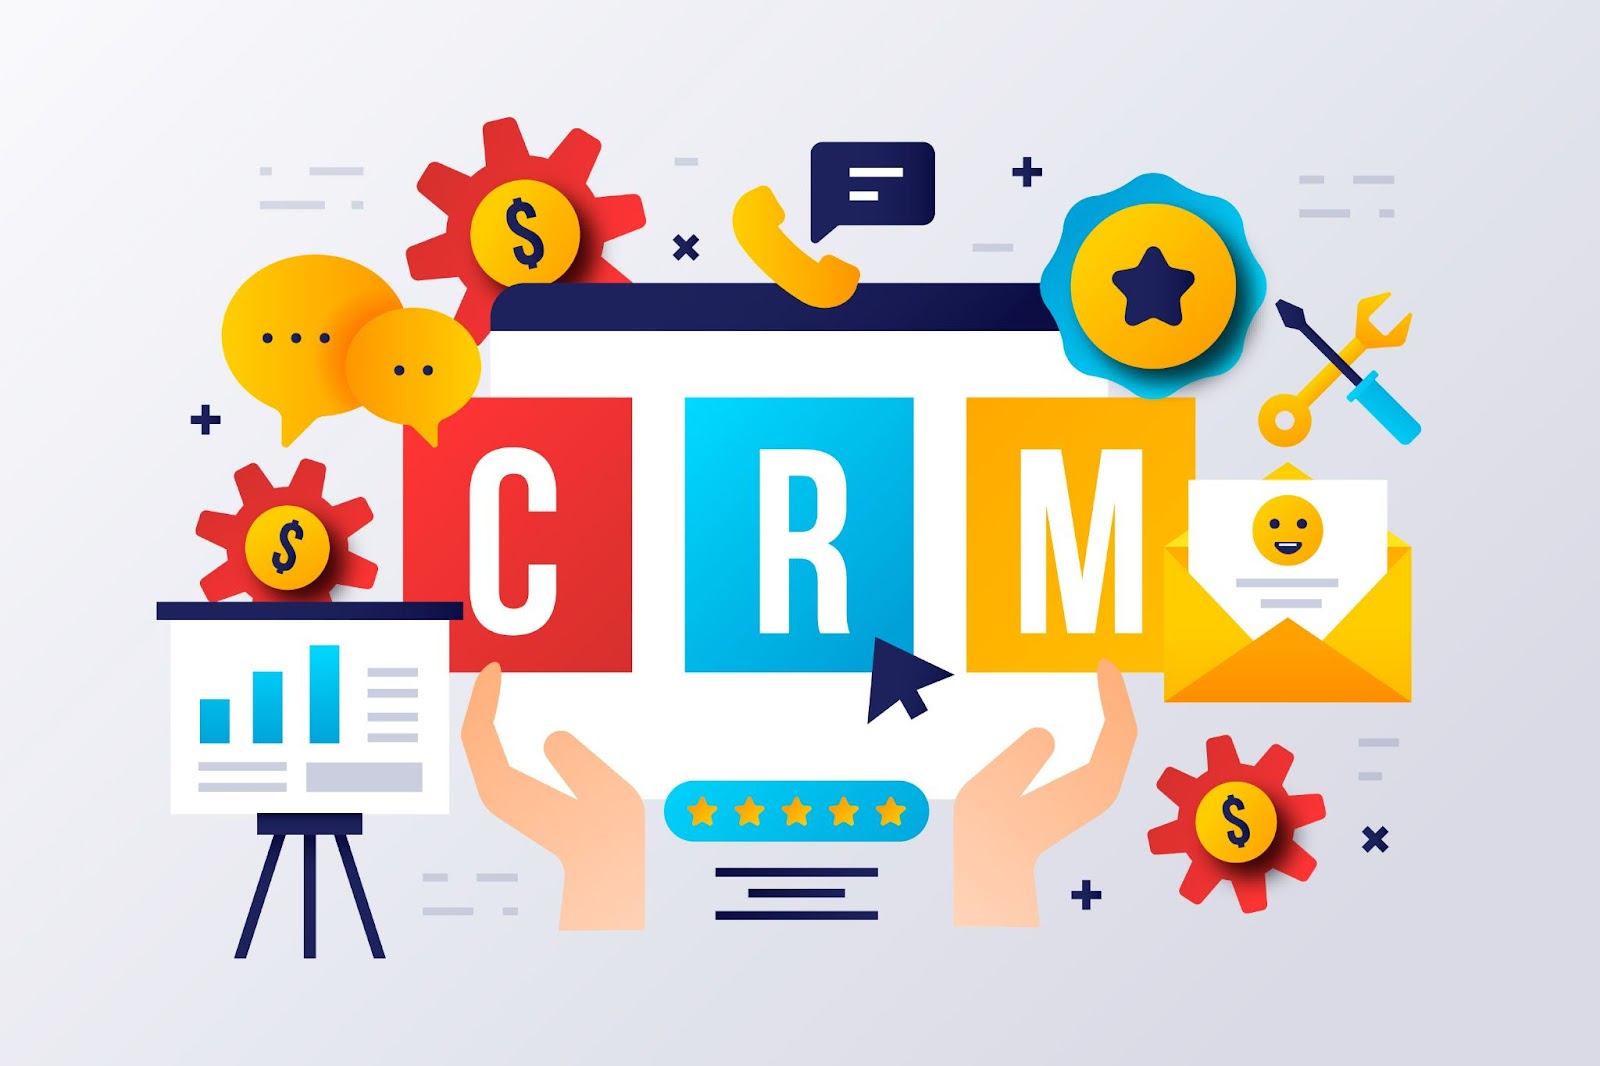 How Does a CRM Work?